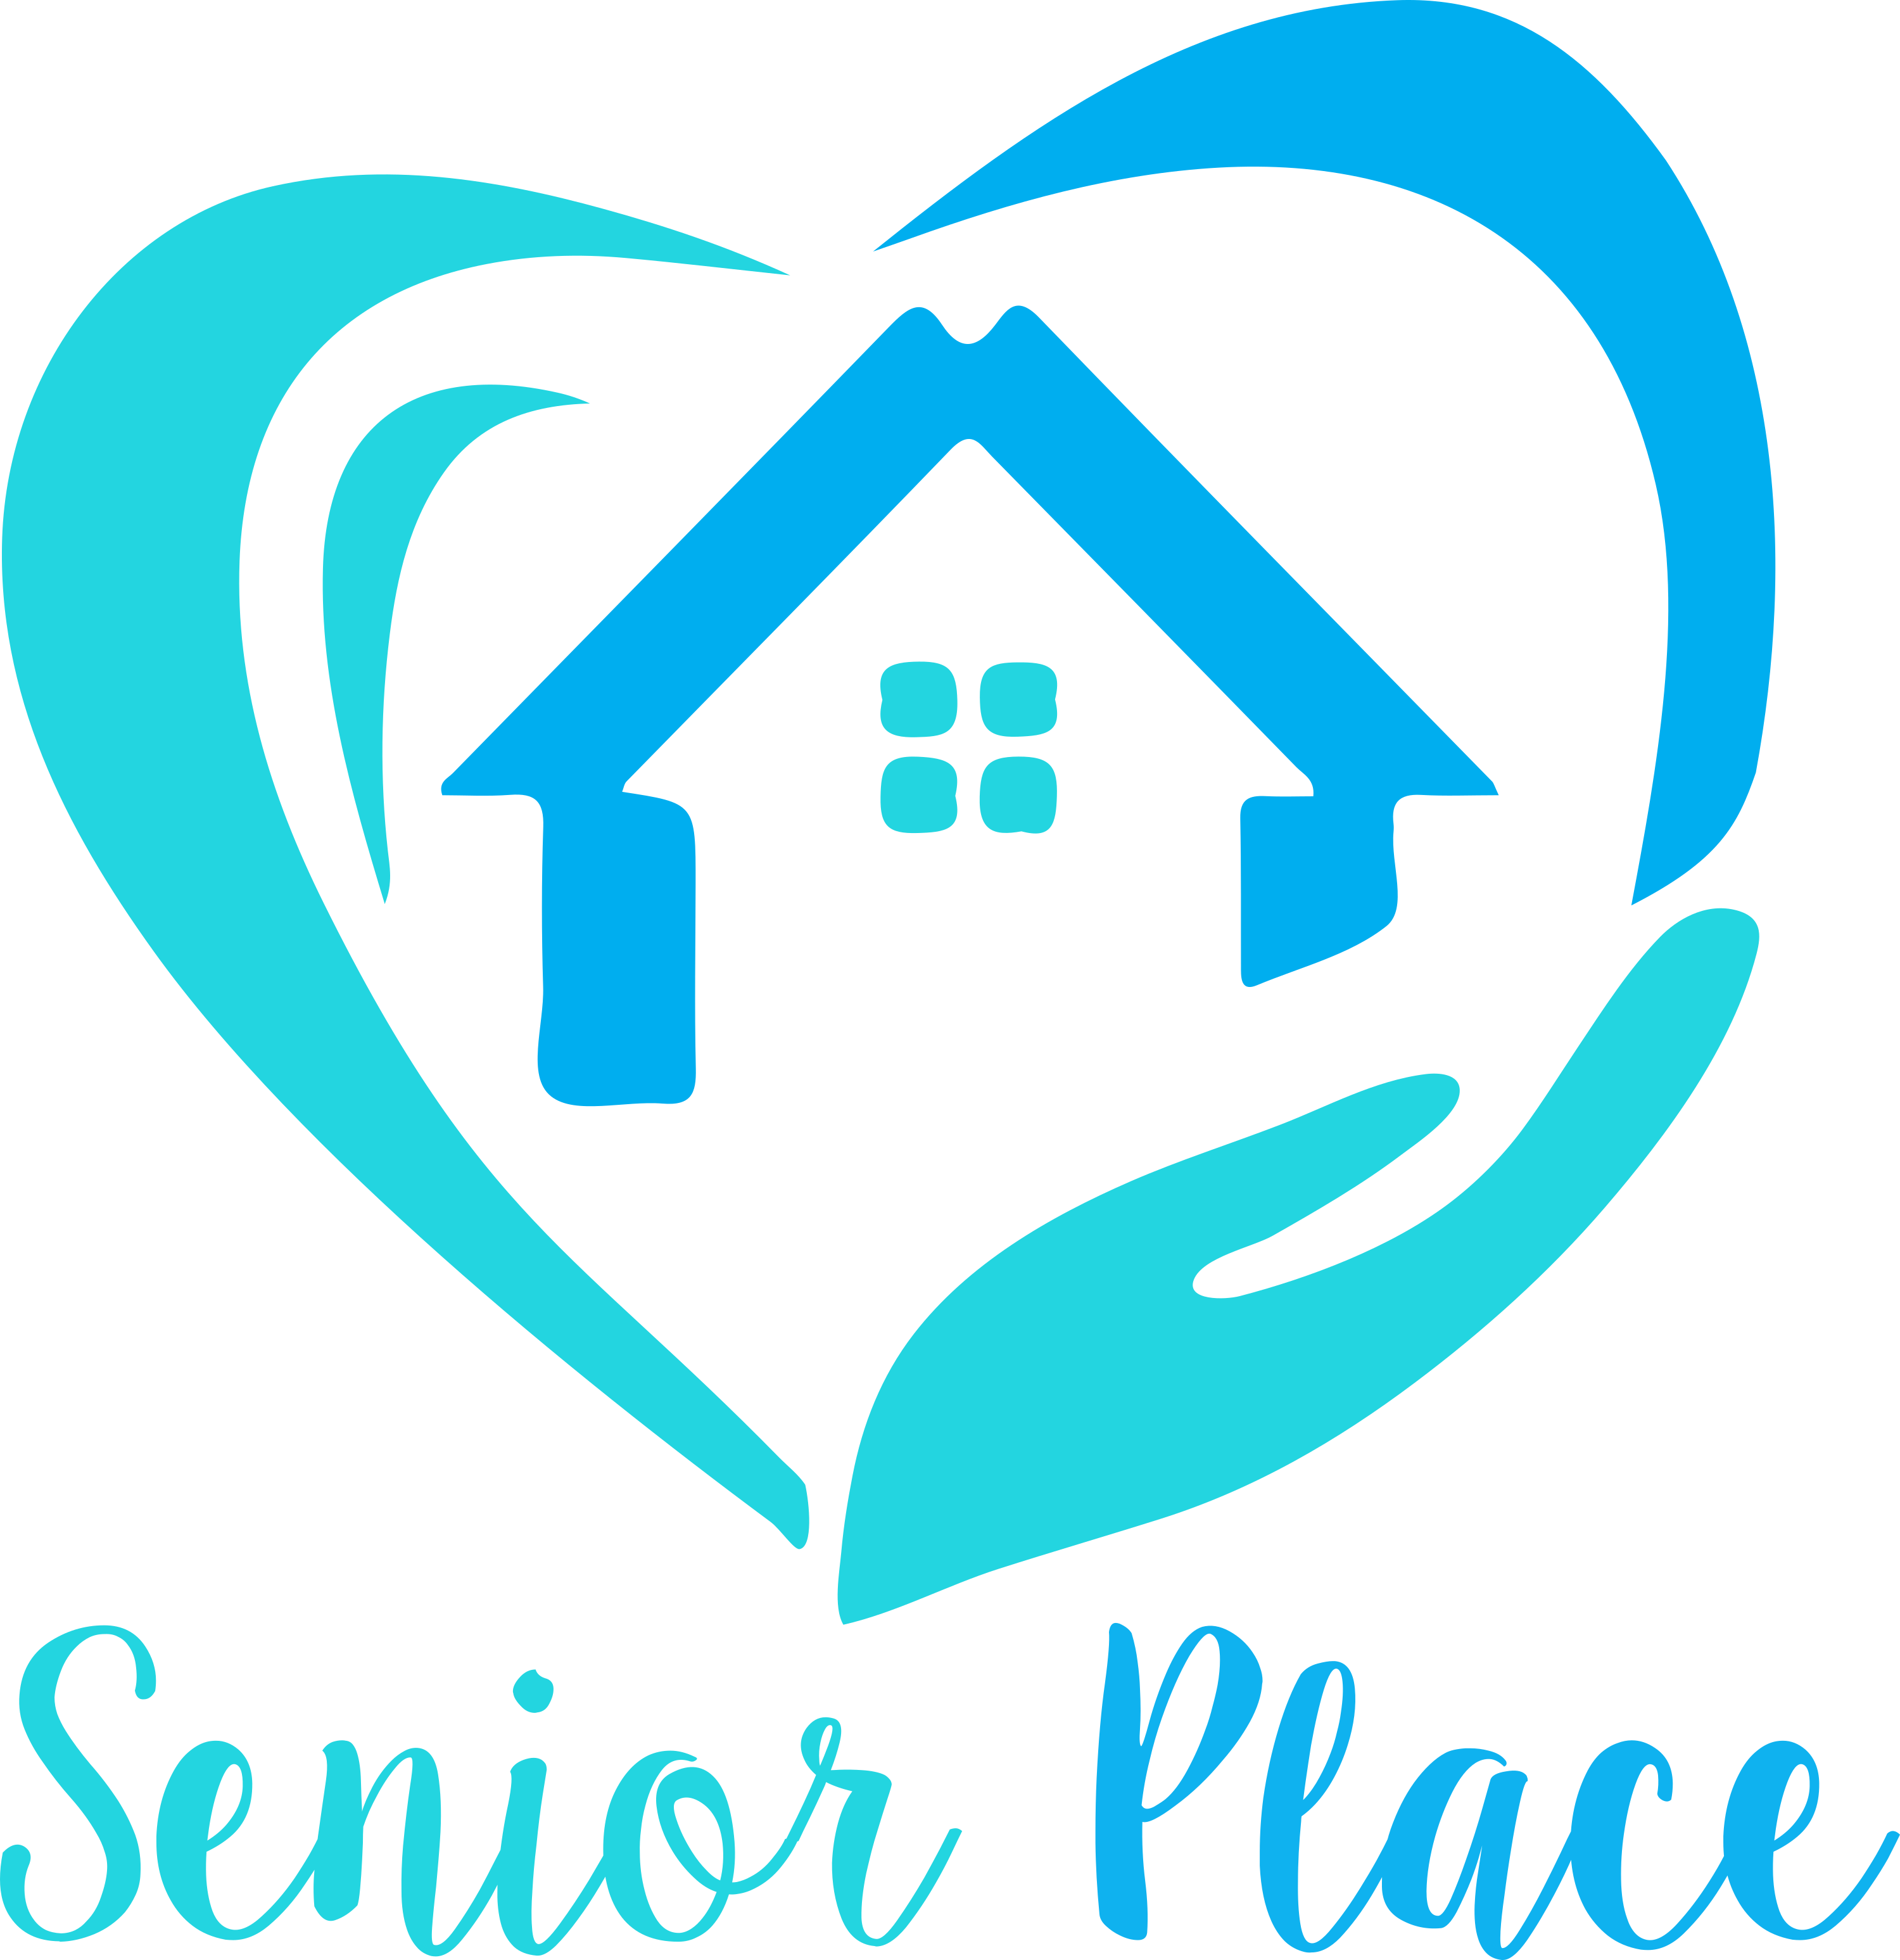 Senior Place is proud to partner with Mom's House